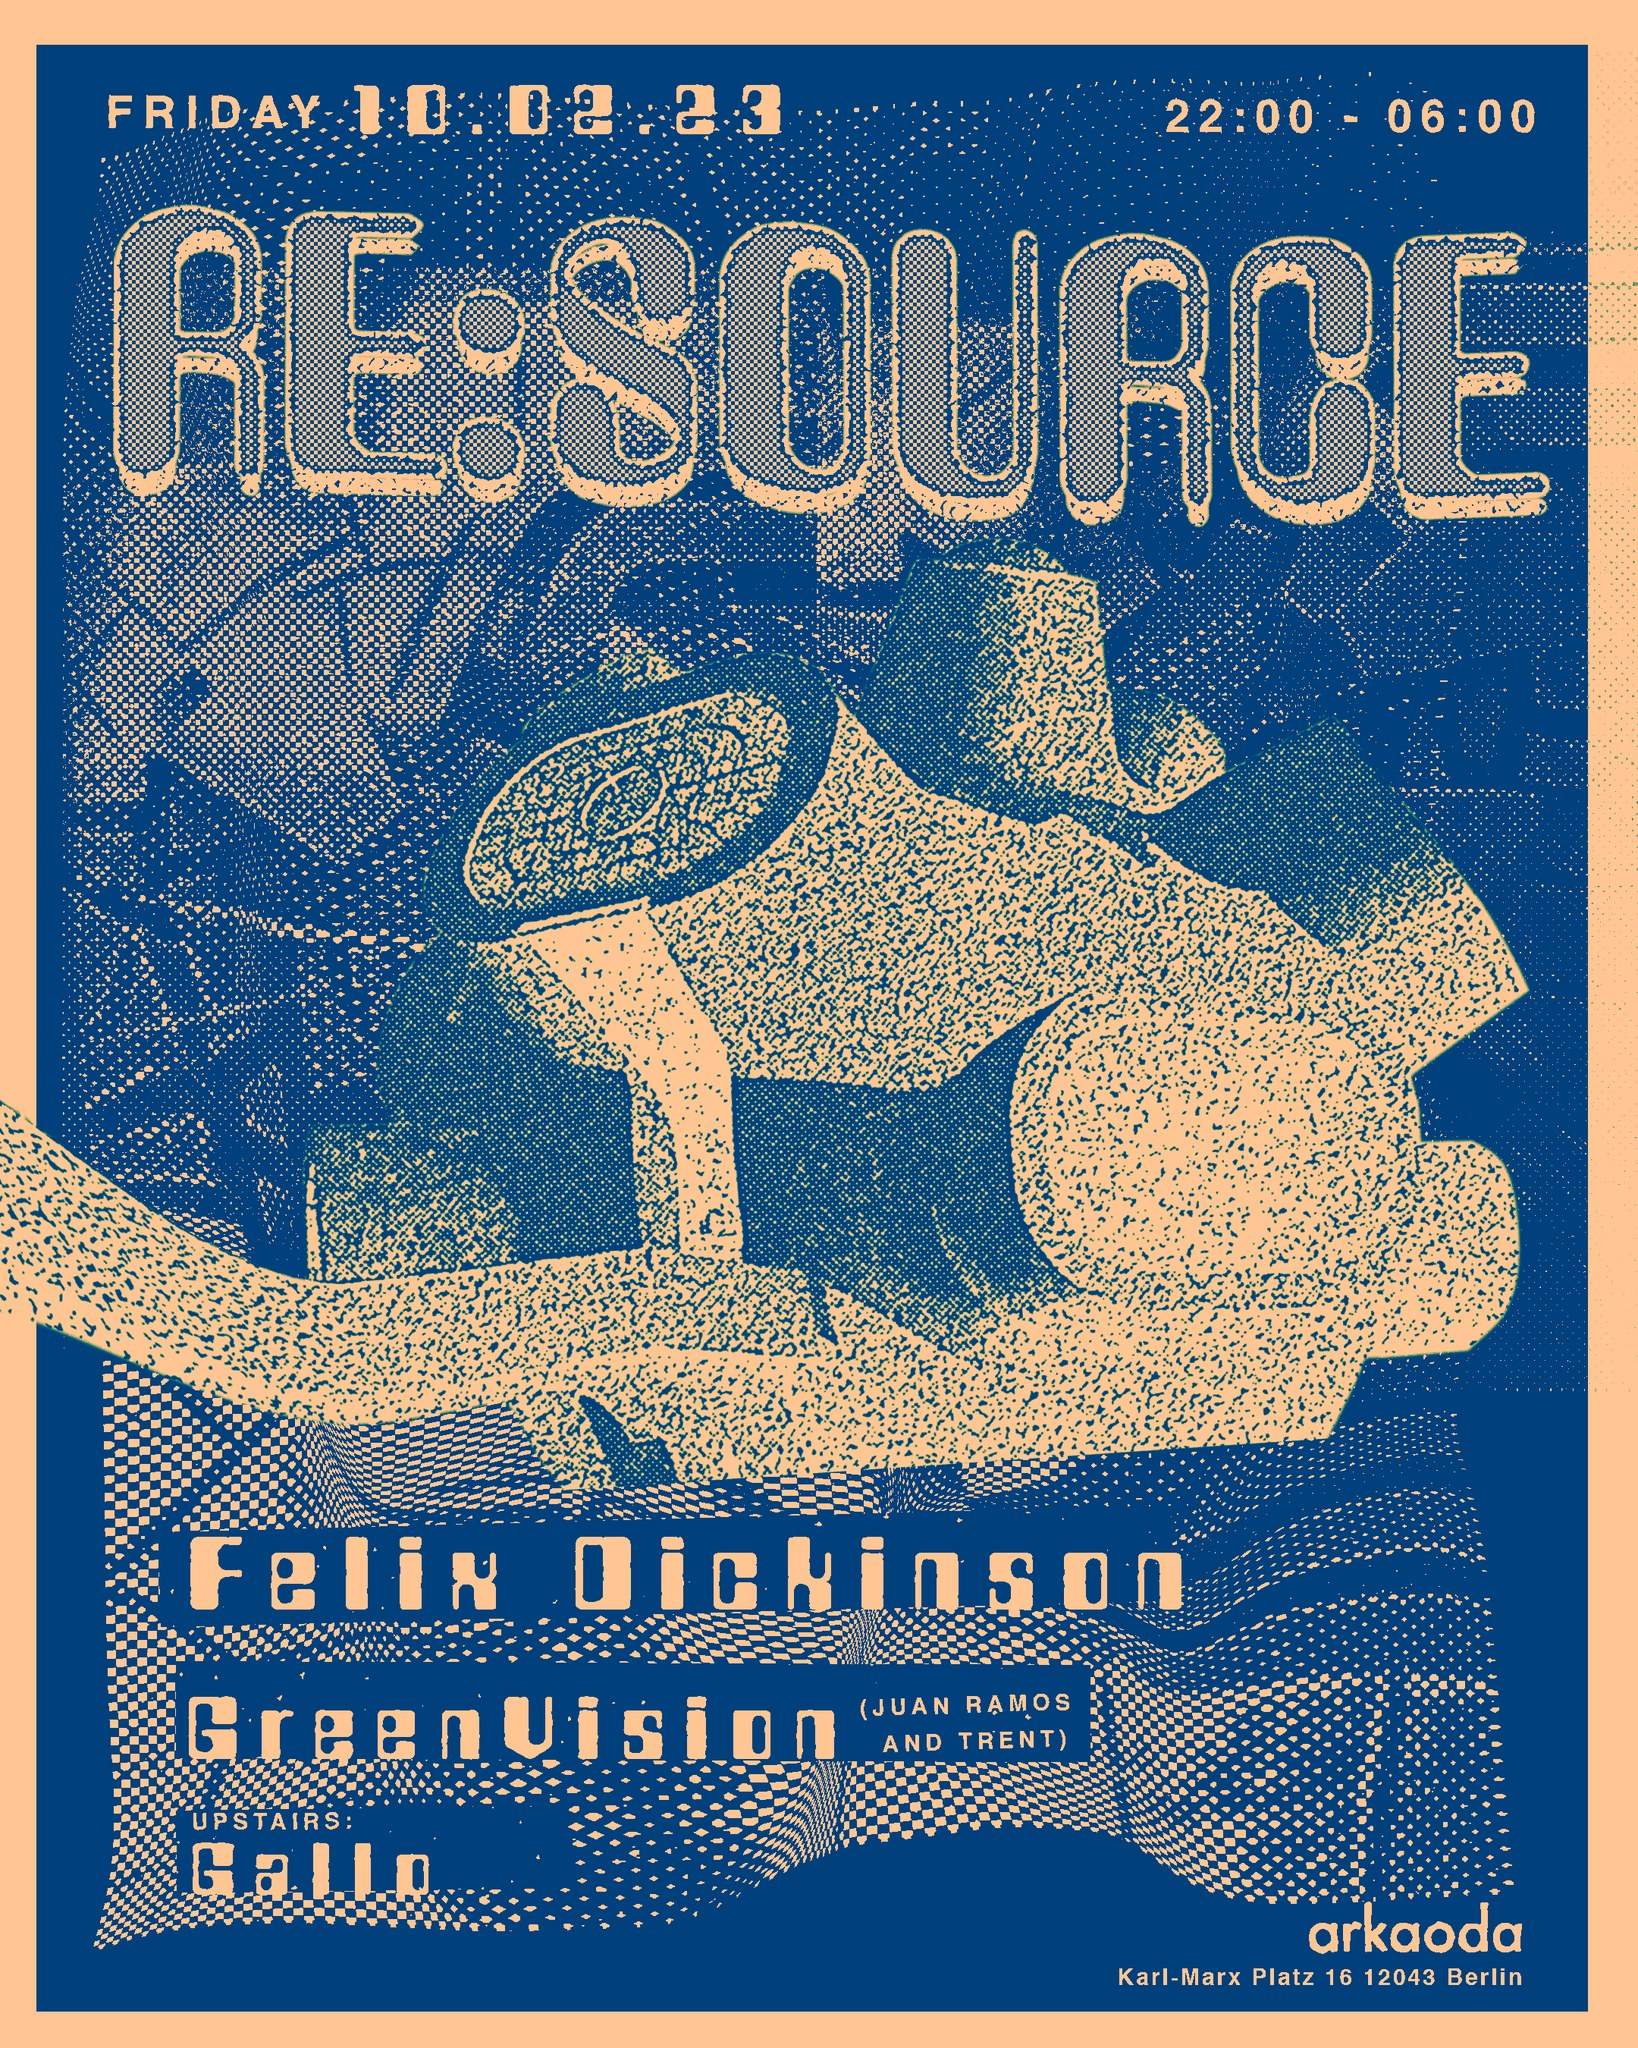 GreenVision presents Re:Source with Felix Dickinson - Página frontal